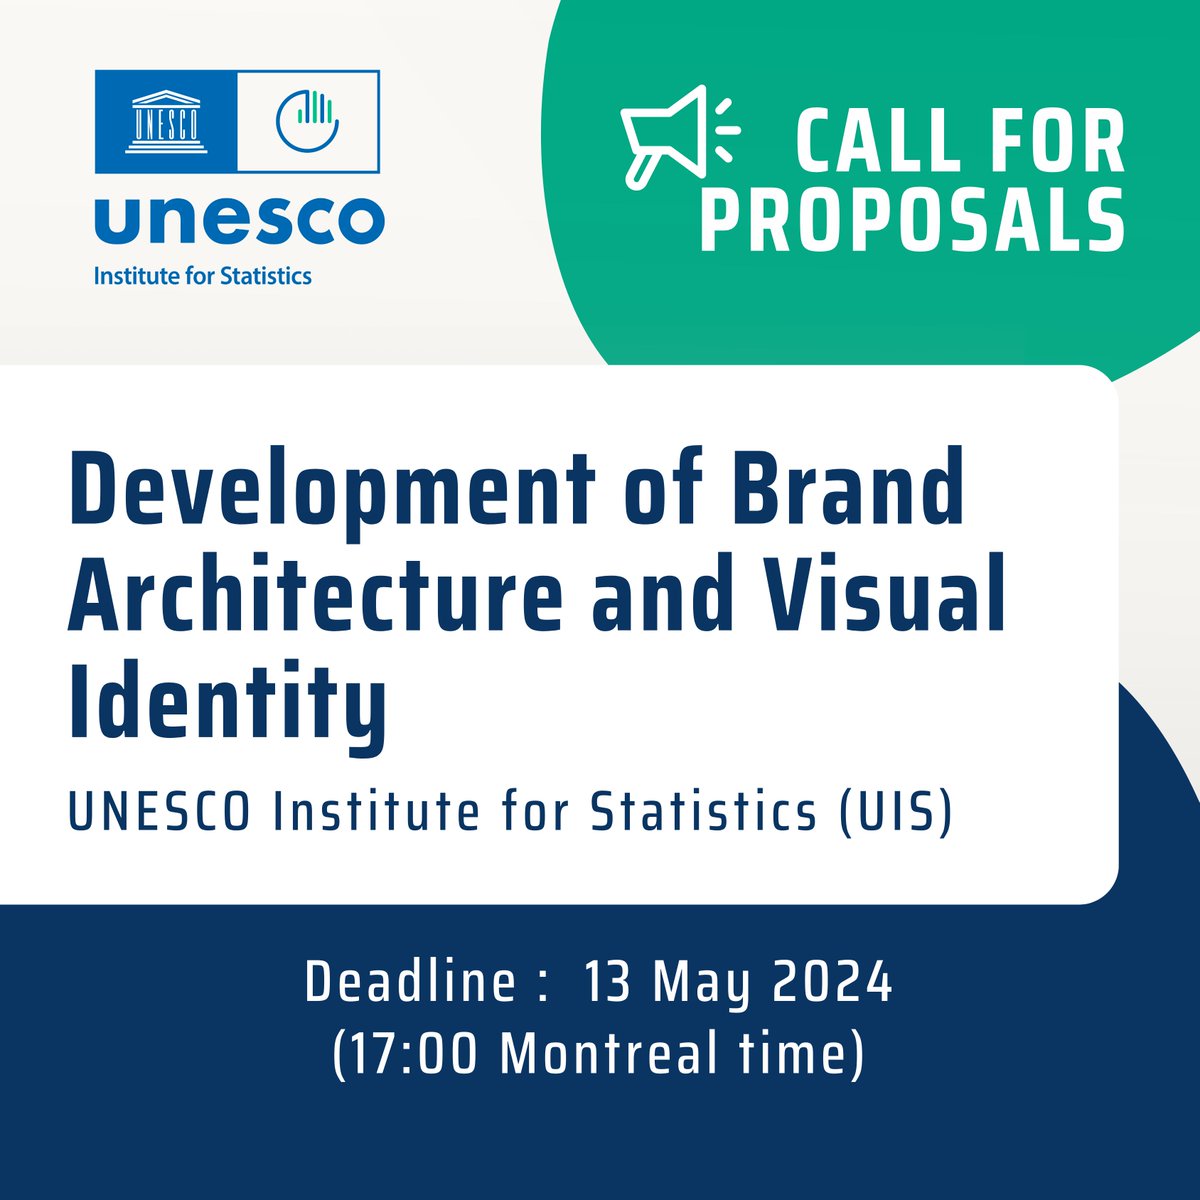 📢 Call for Proposals! #UIS_UNESCO @UNESCOstat is seeking proposals from companies to develop a comprehensive Brand Architecture and Visual Identity for the UNESCO Institute for Statistics (UIS) Details ➡️ ungm.org/Public/Notice/… ⏰ Deadline: 13 May 2024 (17:00 Montreal Time)